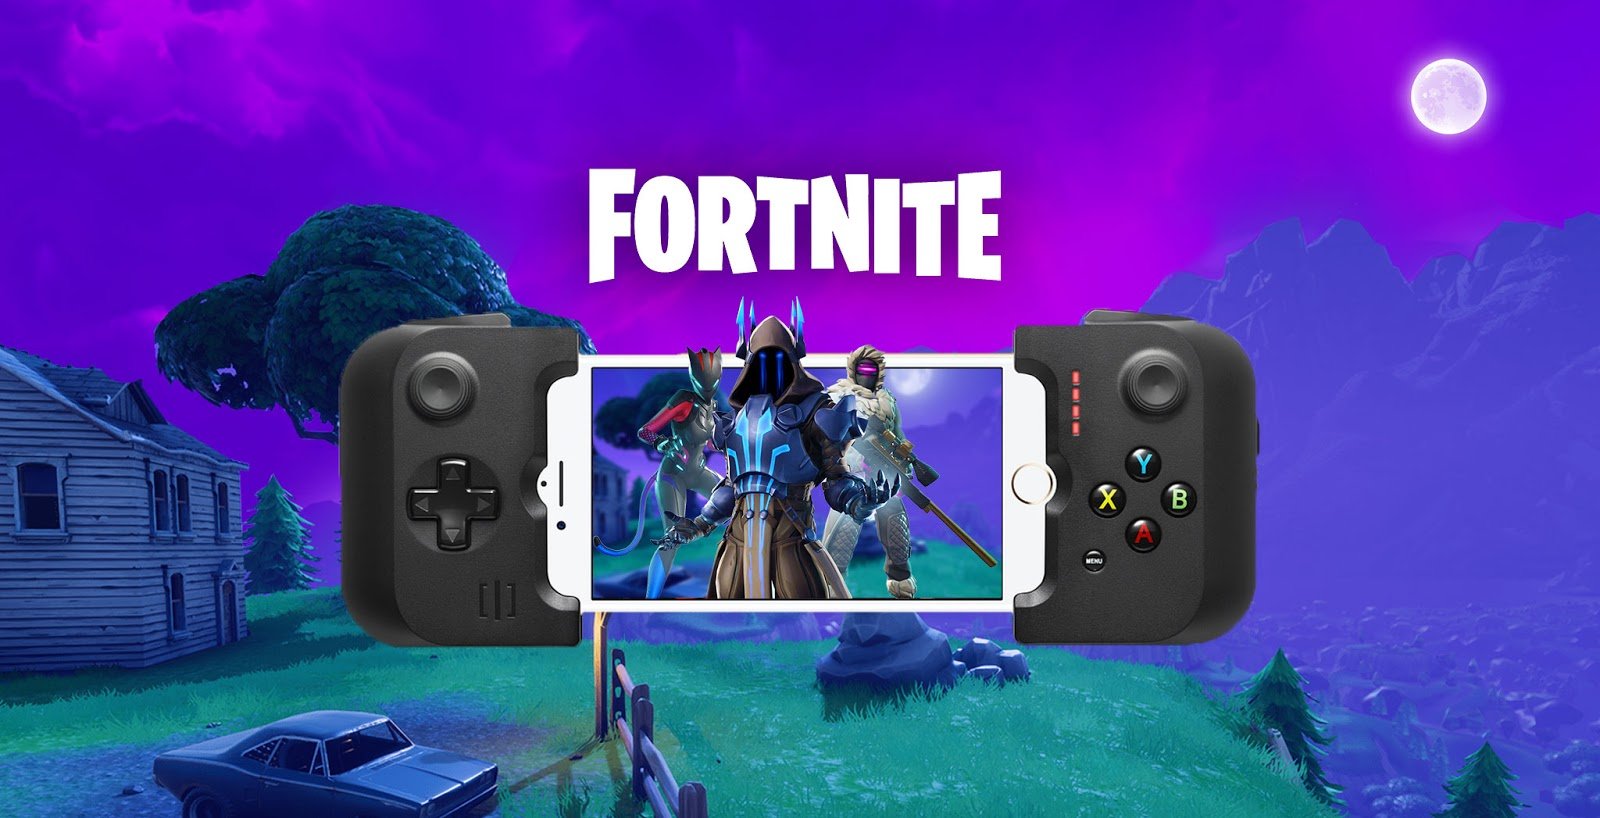 gamevice discounts iphone controller to celebrate fortnite season 8 for a limited time on amazon toucharcade - fortnite mobile controller ios amazon